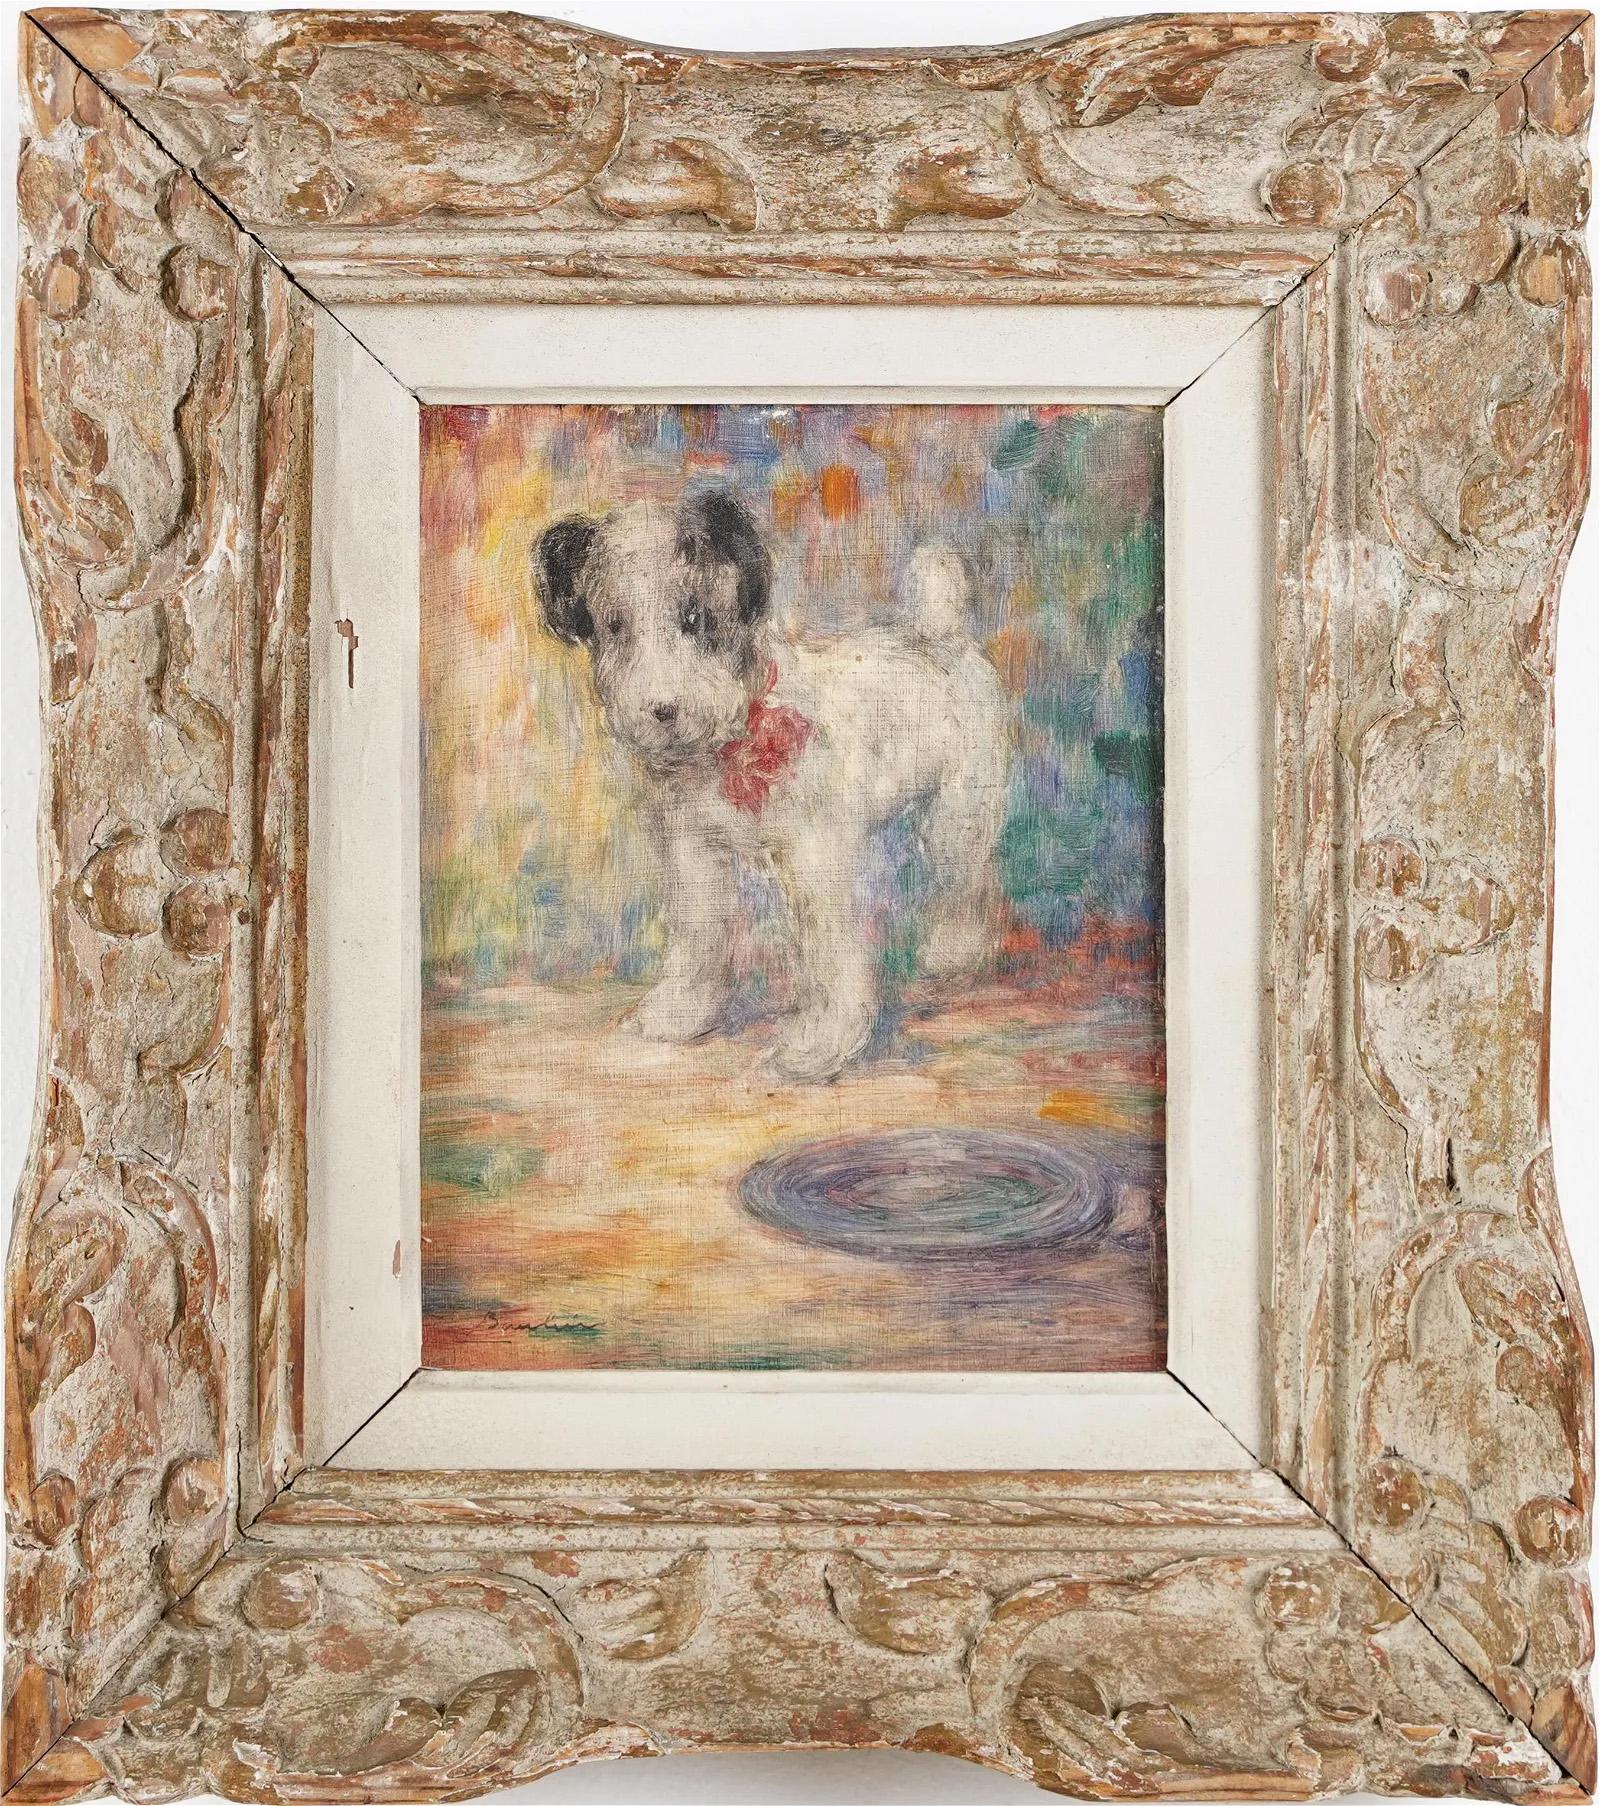 Antique French Impressionist Framed Signed Puppy Dog Portrait Oil Painting - Brown Animal Painting by Unknown